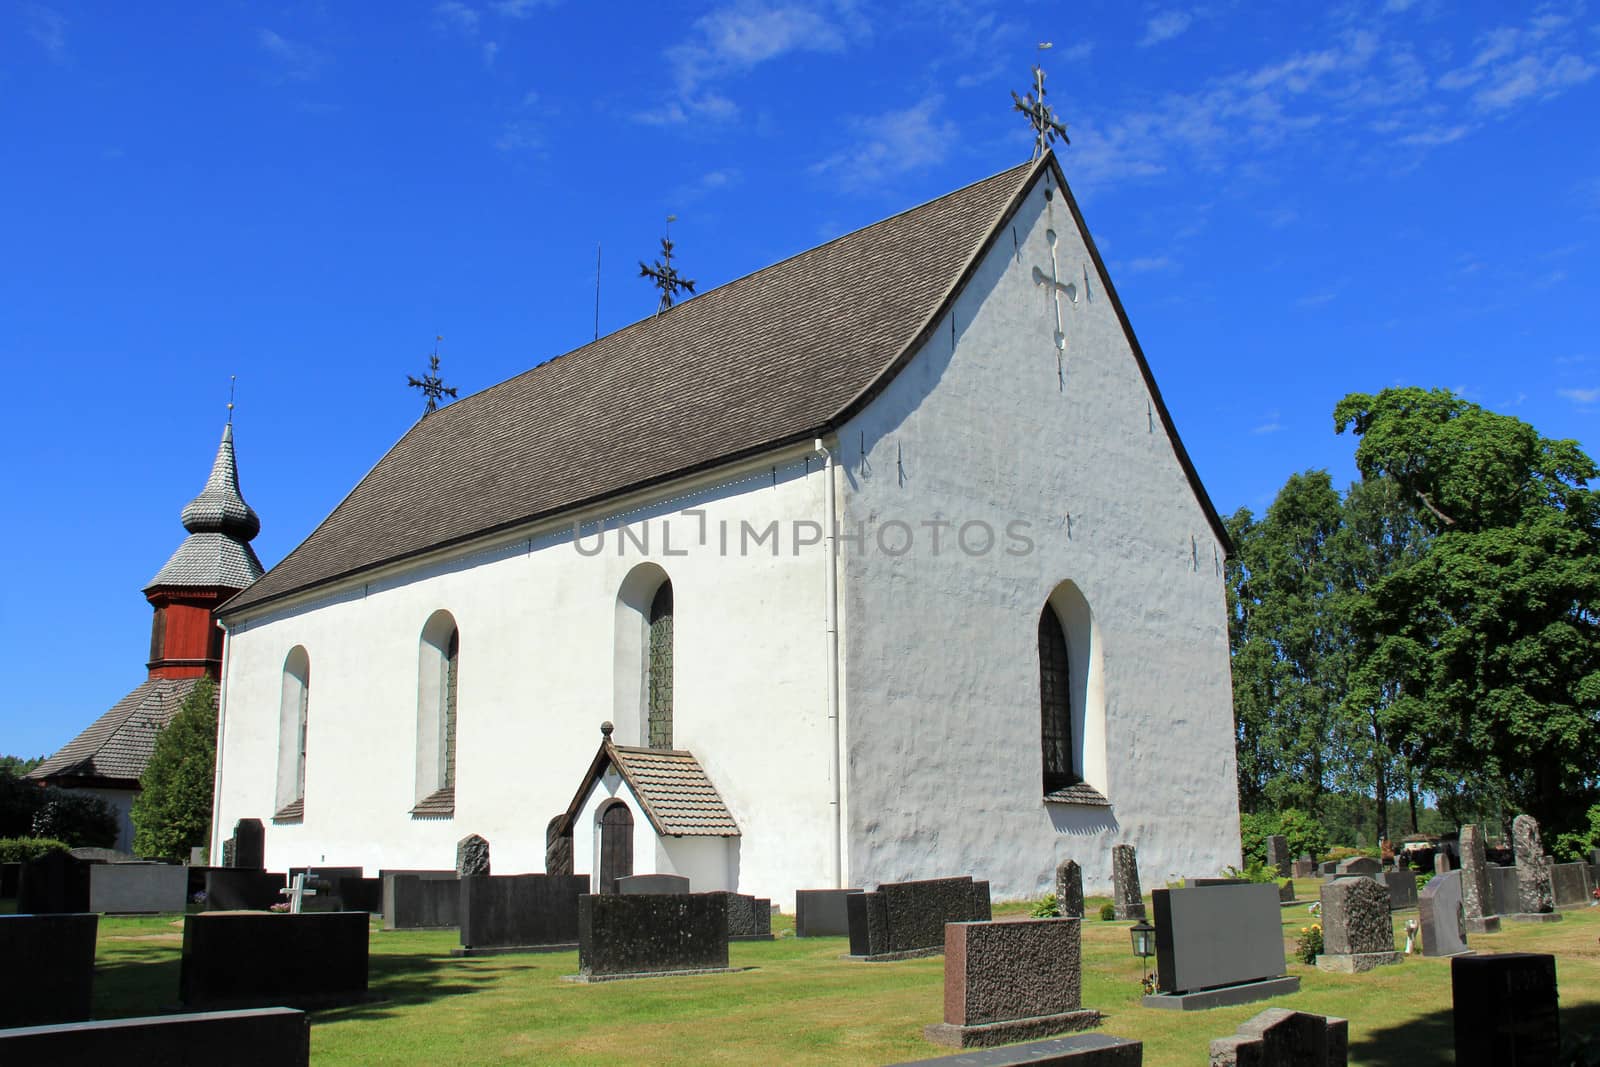 The white Askainen church, Finland, completed 1653, on a bright day of summer.